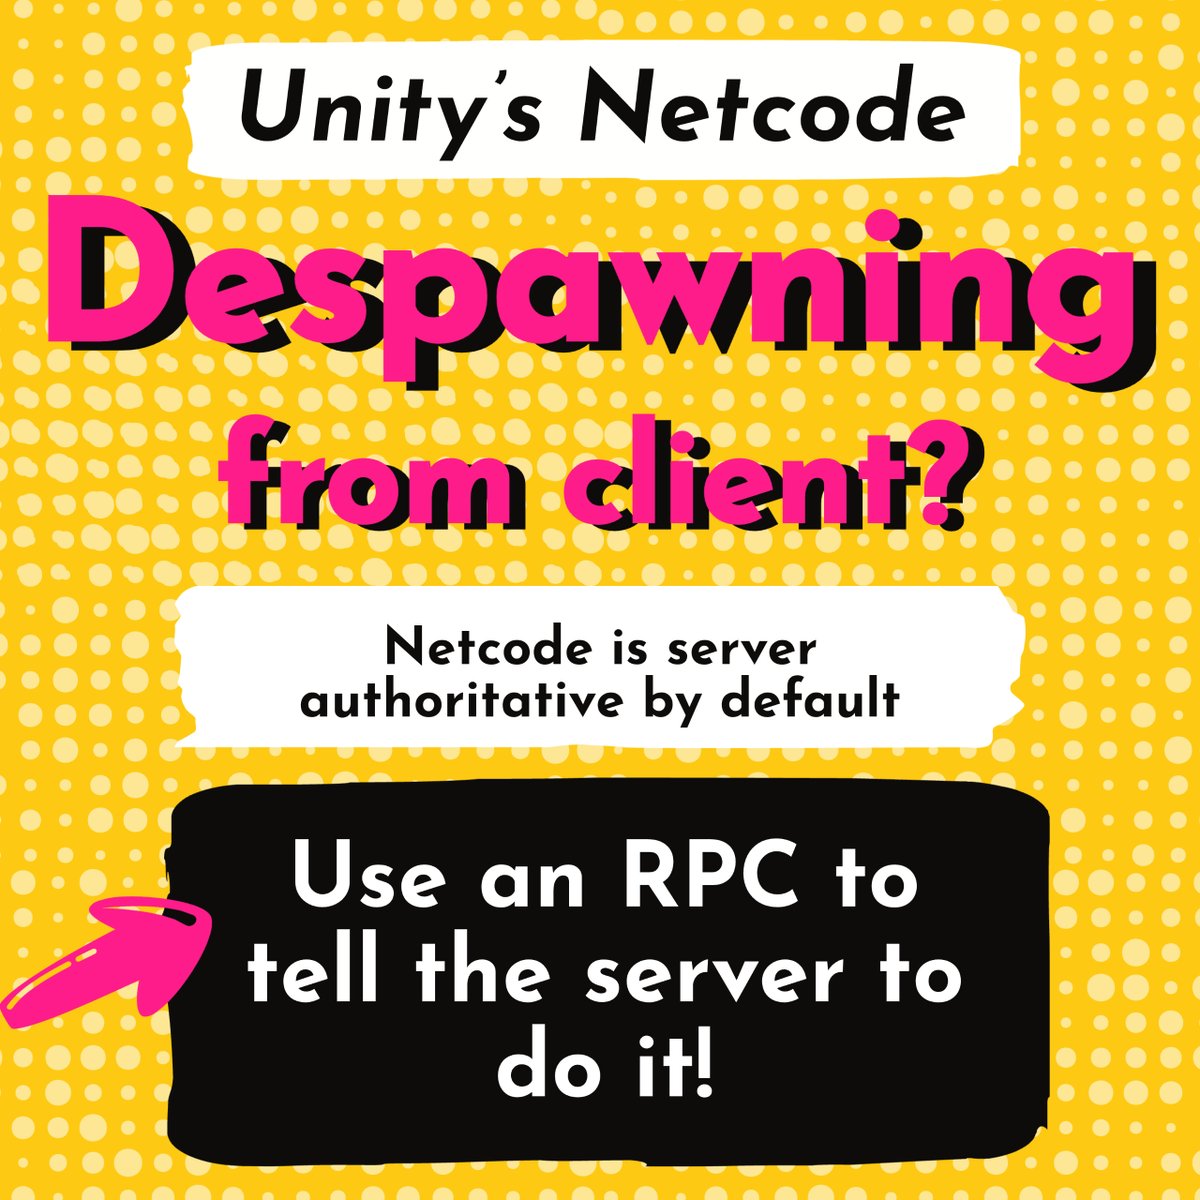 Netcode is server authoritative, use RPCs to perform actions for the client, on the server.

#UnityTips #Unity2d #Unity3d #gamedev #indiedev #gamedevelopment #coding #csharp #IndieGameDev